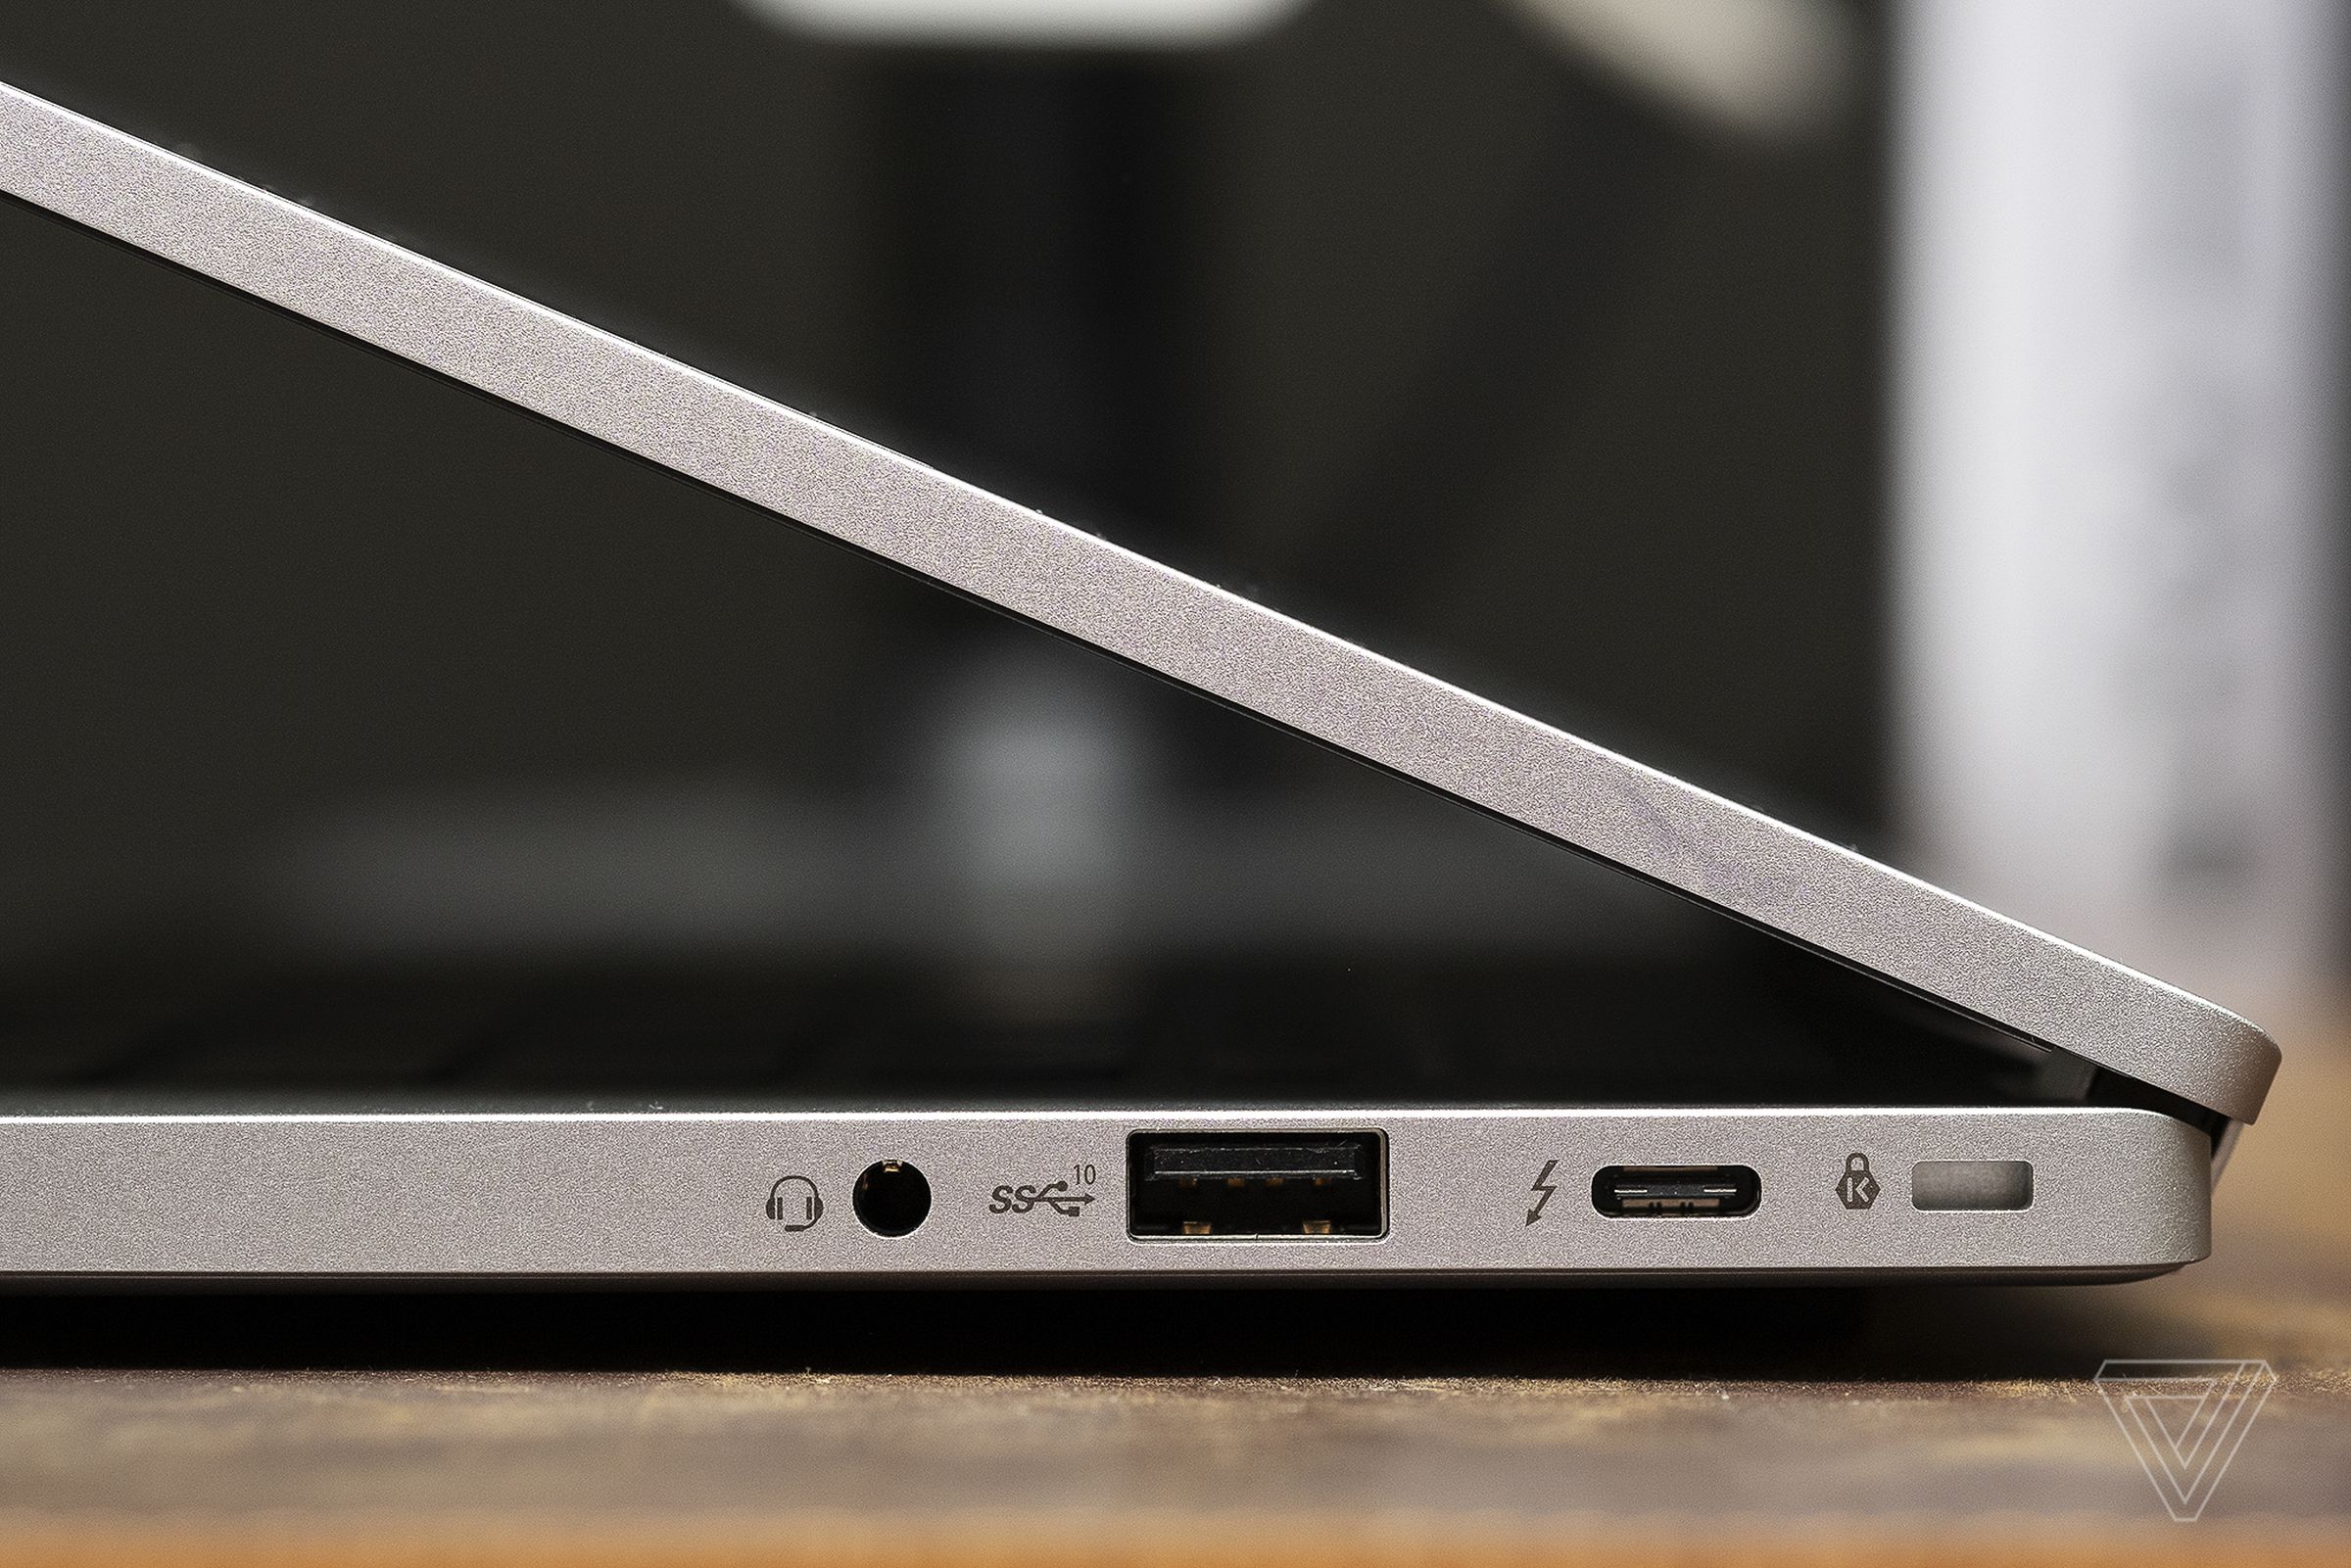 3.5mm audio jack, 10Gbps USB-A, and Thunderbolt 4 can be found on the right edge.